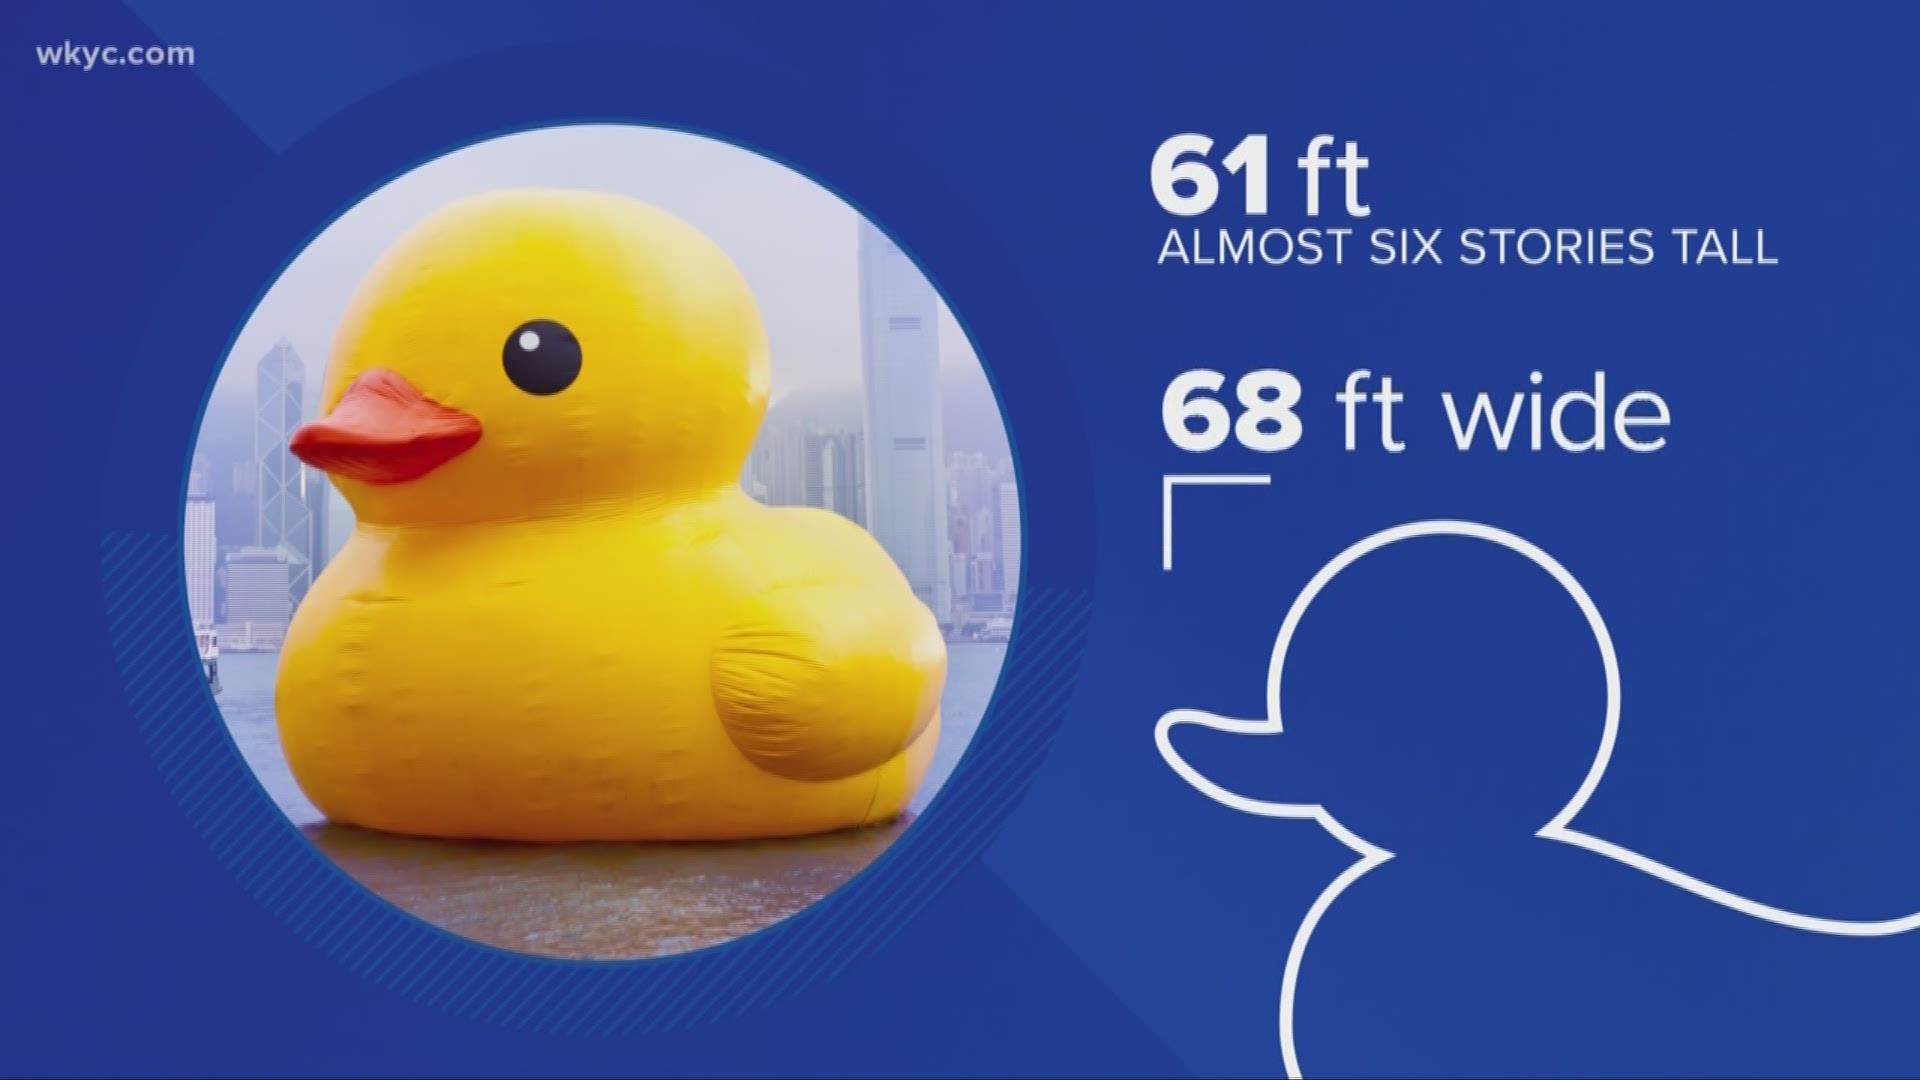 July 12, 2018: At 61 feet tall, the rubber duck weighs 22,000 pounds once it's inflated.